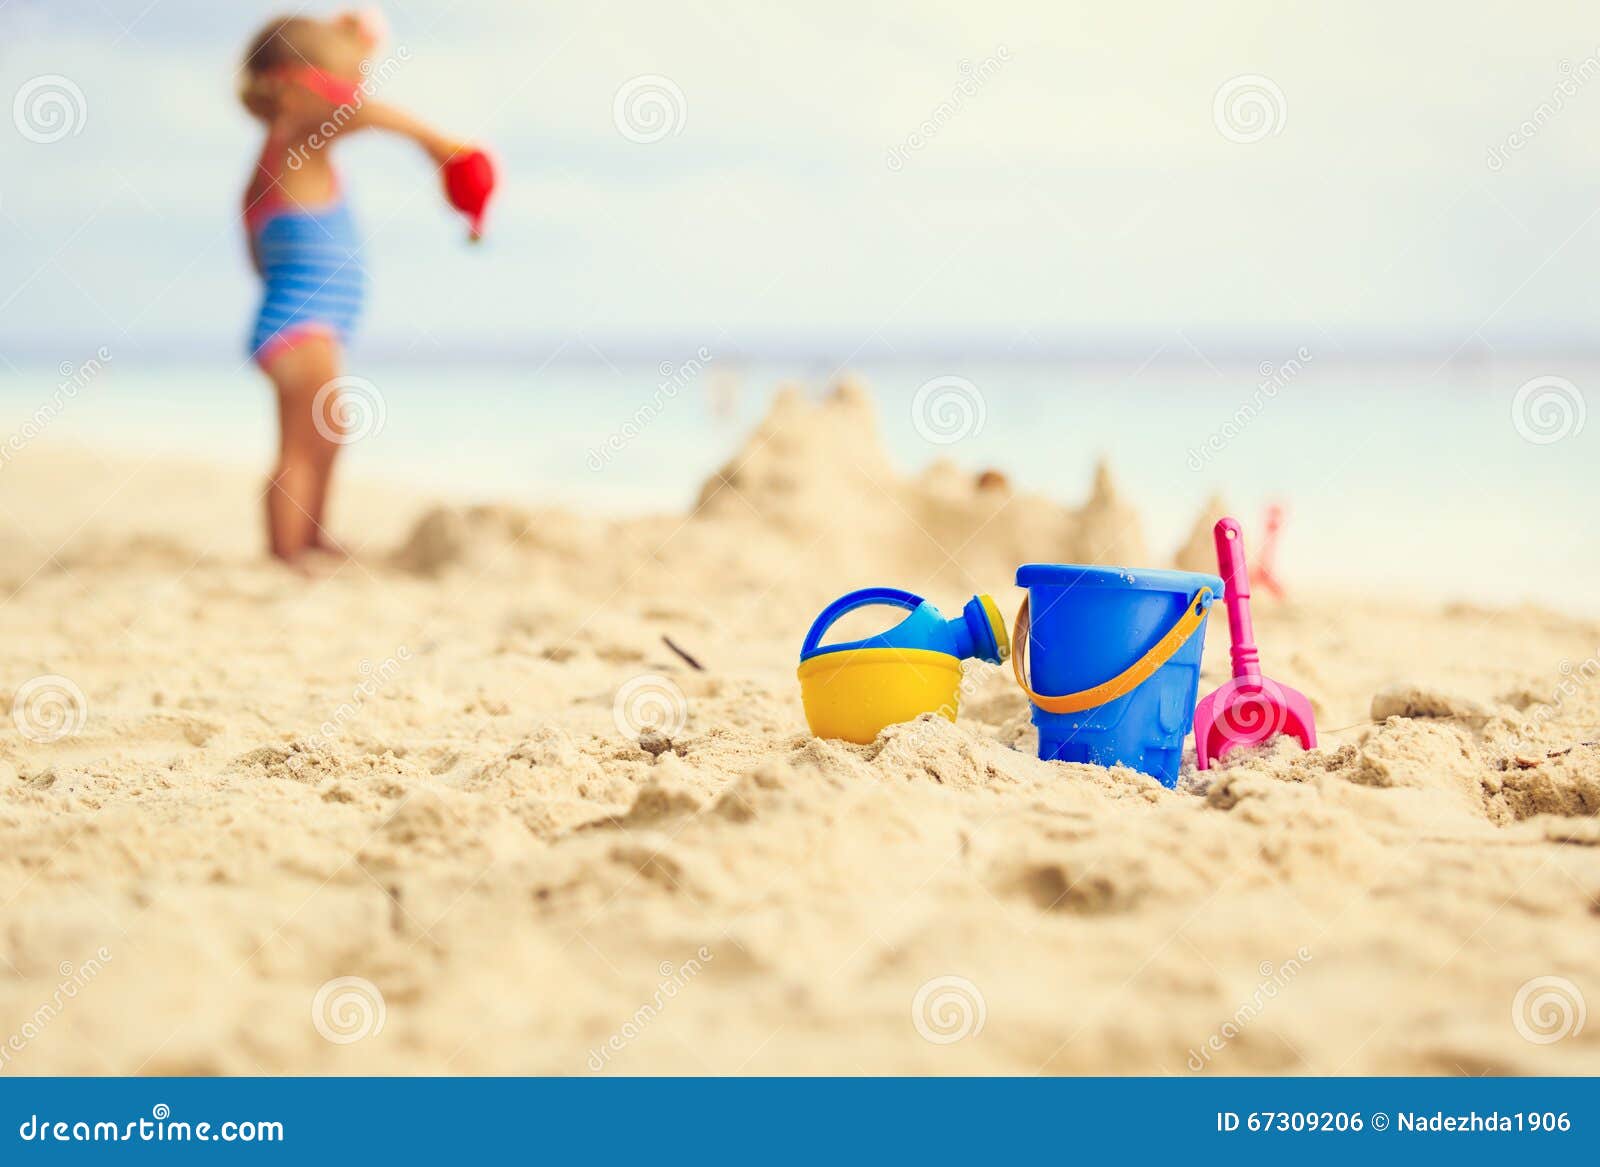 Kids Toys and Little Girl Building Sandcastle Stock Photo - Image of ...